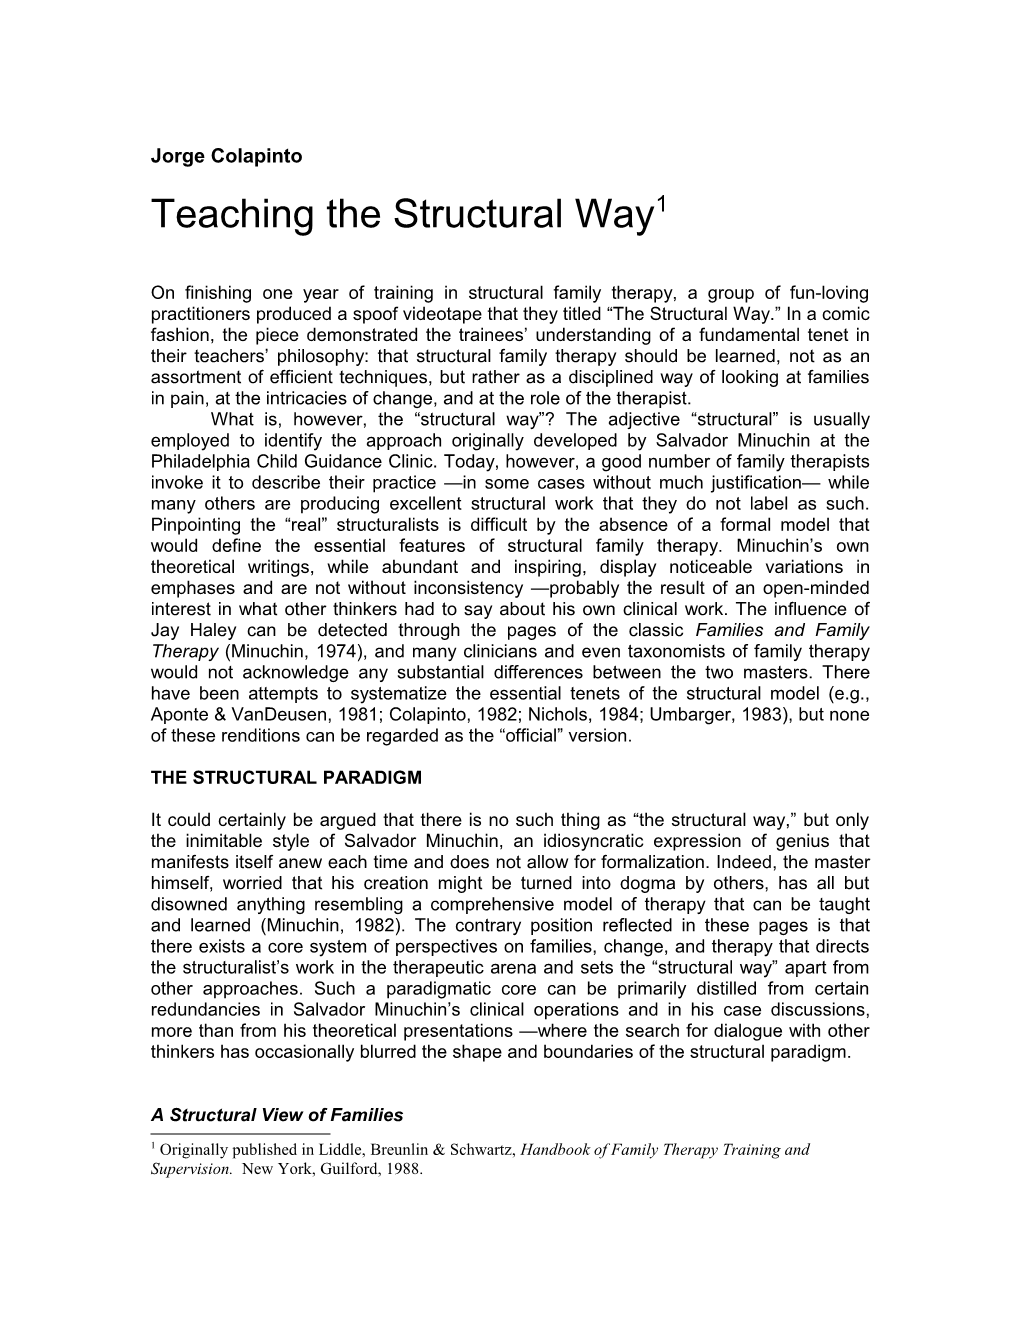 Teaching the Structural Way